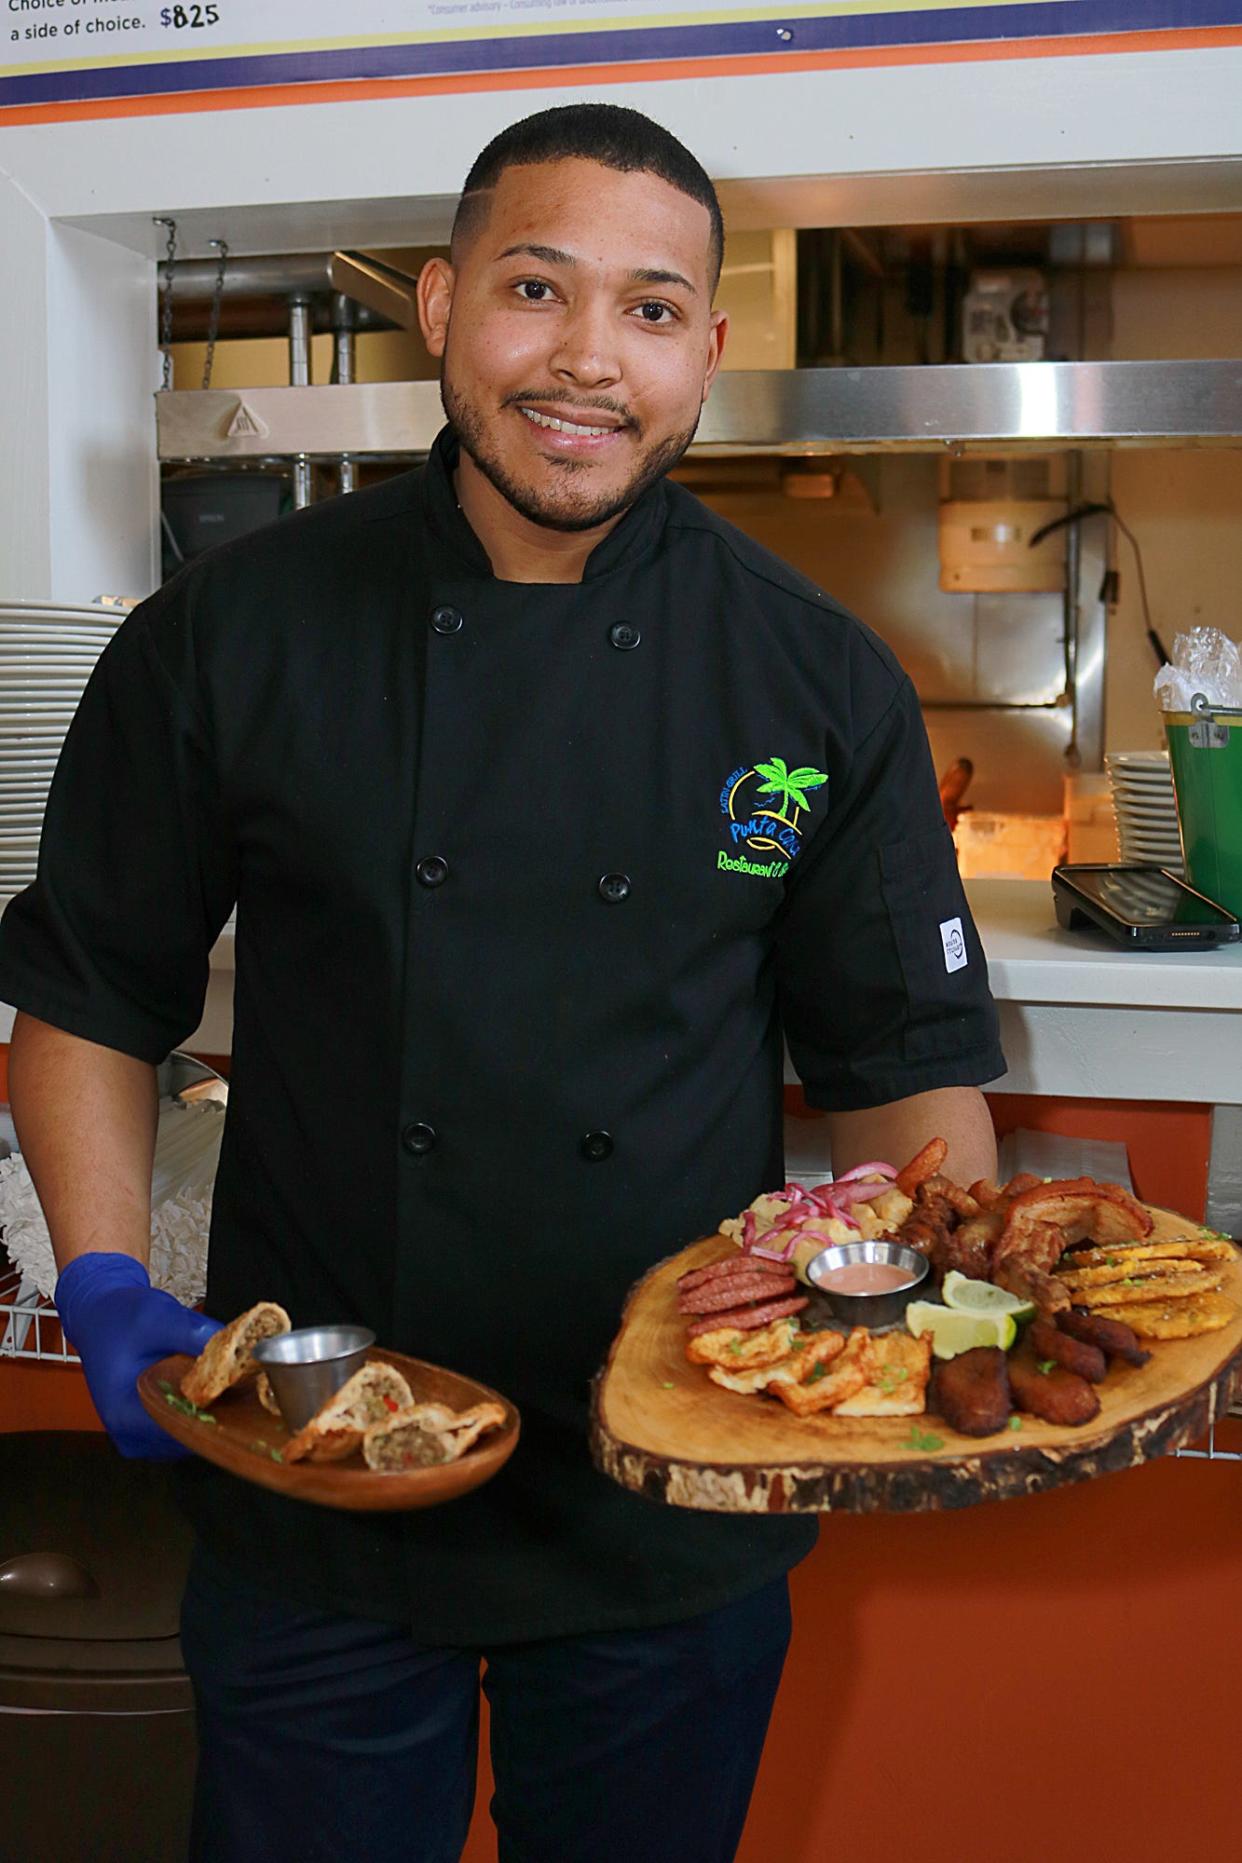 Punta Cana Latin Grill co-owner and chef Frank Cambero holds sample plates featuring empanadas, fried yucca, tostones, maduros, and a variety of Dominican seasoned meats.